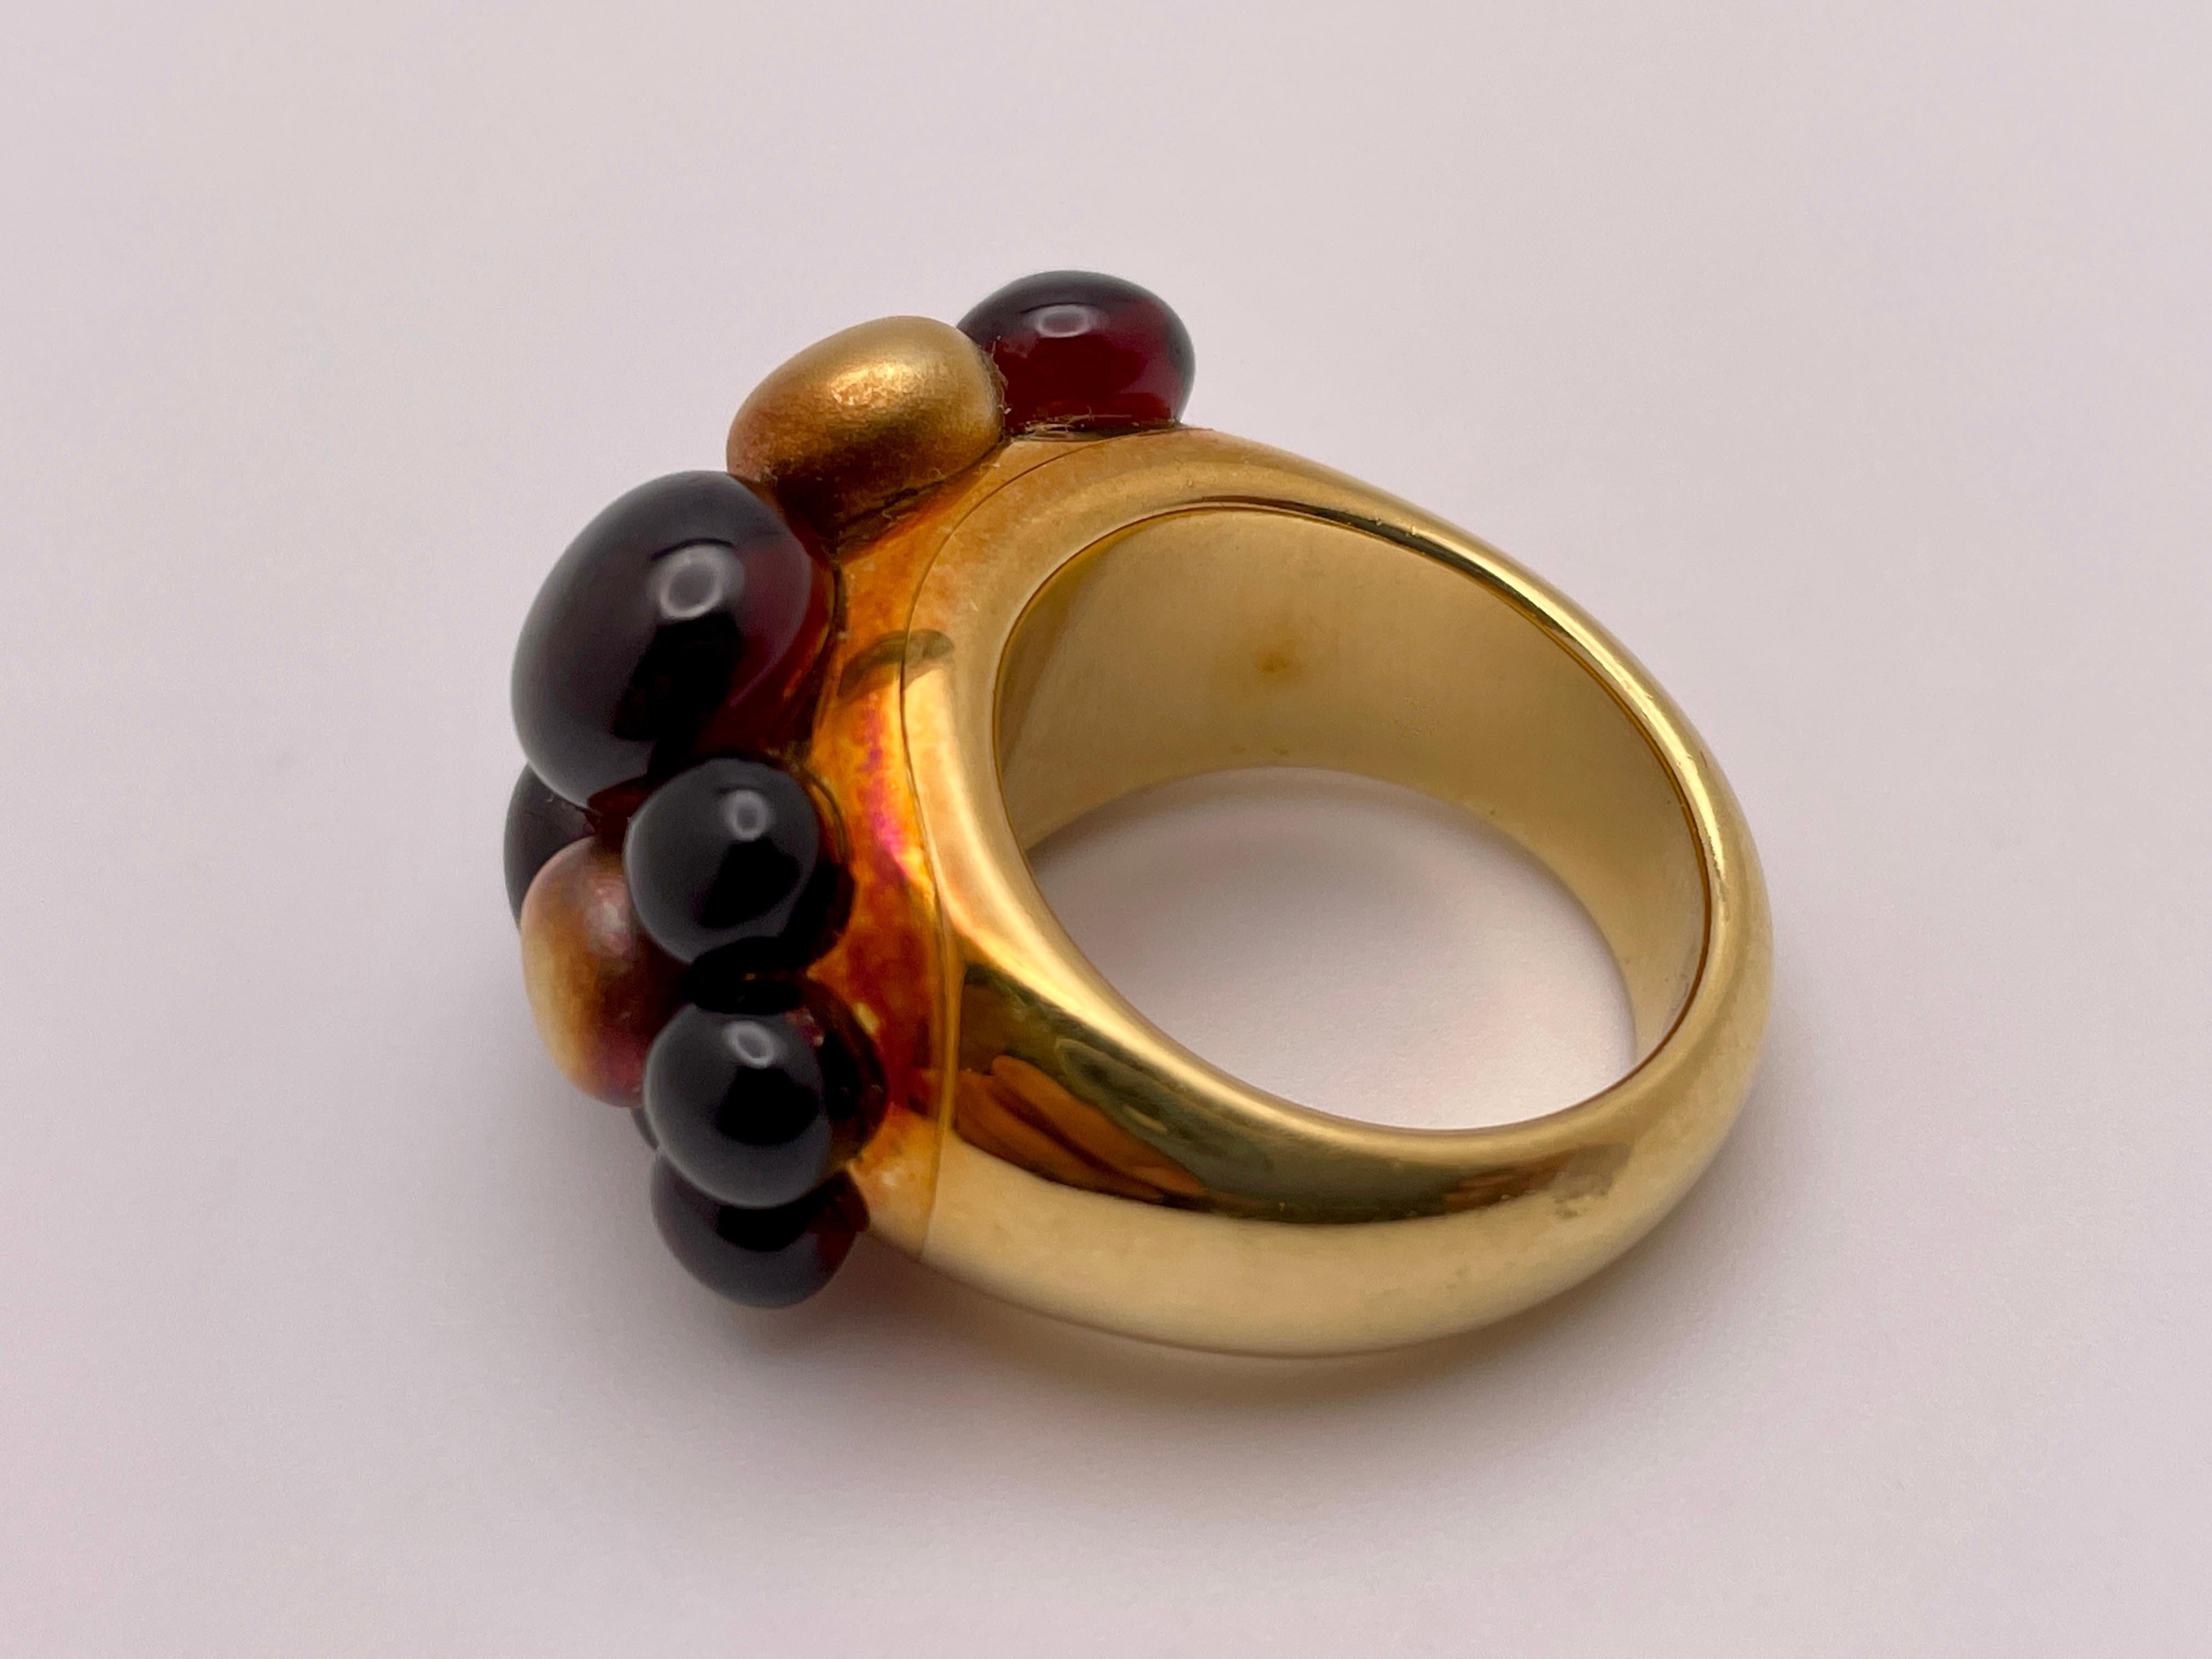 An authentic 18K yellow and red gold Pomellato color stone ring. Set with 11 cabochon round garnets, weighing approximately 15 CT,  throughout which three golden nuggets are scattered. This beautiful ring has a gross weight of 32 grams, and is a